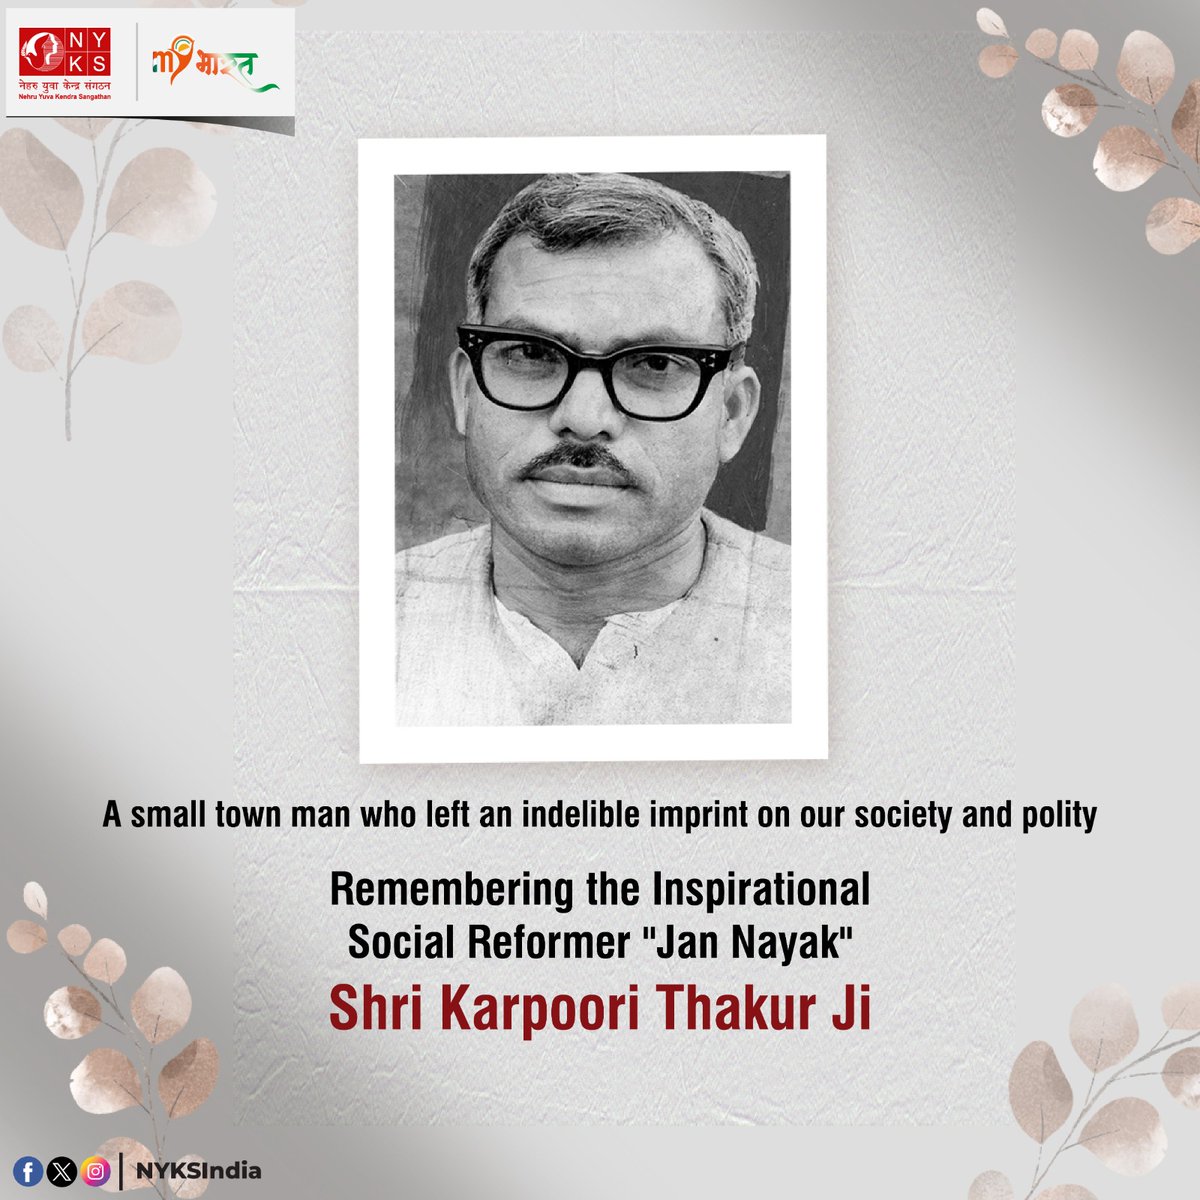 The Government of India has decided to honor Shri #KarpooriThakur ji with the highest civilian honor of India #BharatRatna. Born in the small of Samastipur, Bihar, He went on to become one of the most respected leaders of Modern India, serving twice as Chief Minister of Bihar.